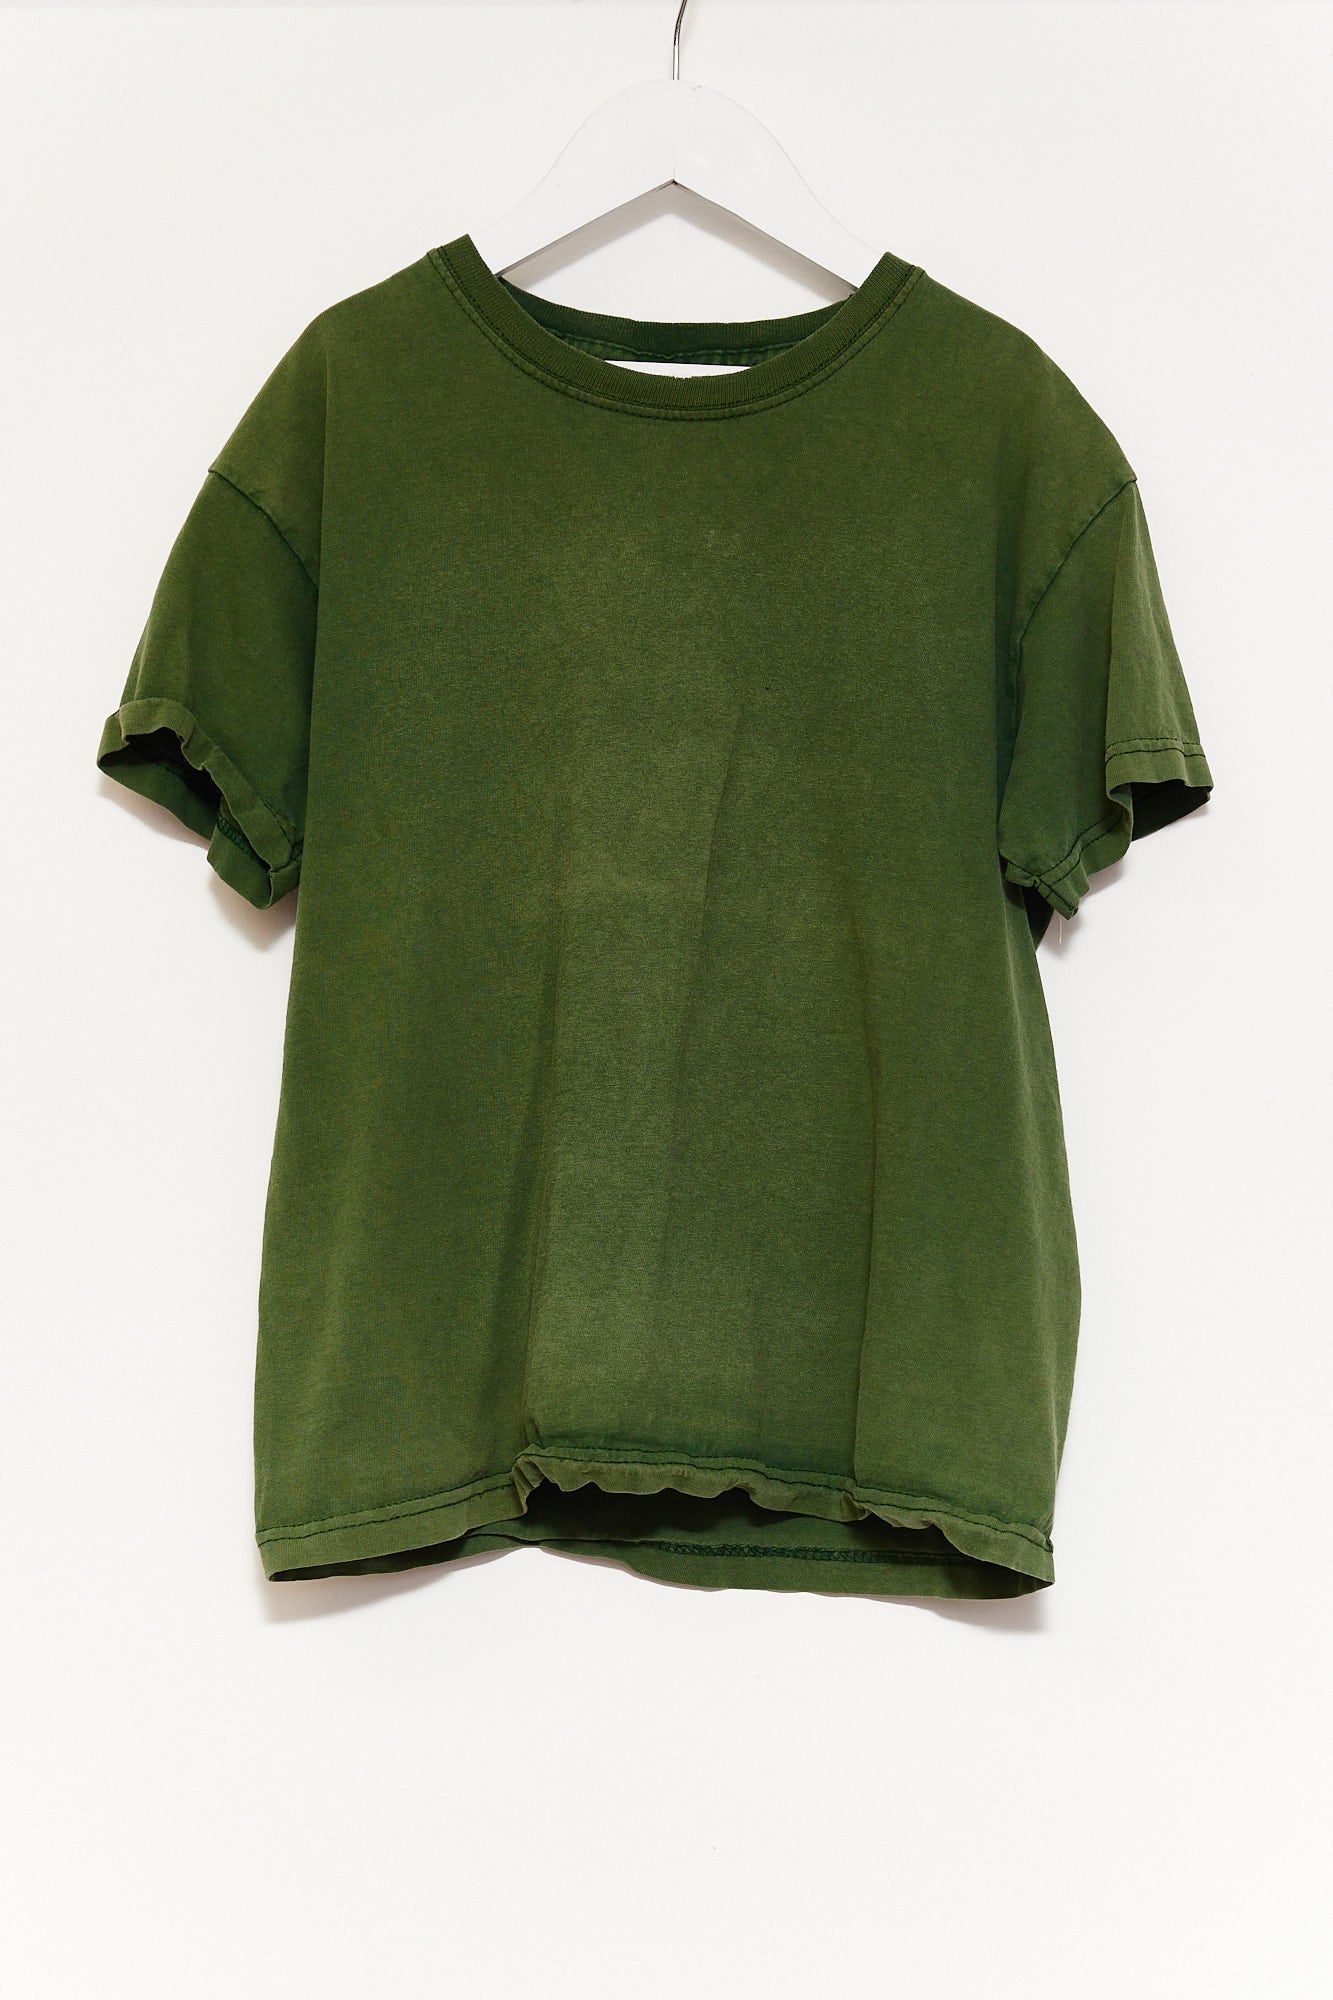 Kids Fruit of the Loom Green T-shirt age 8